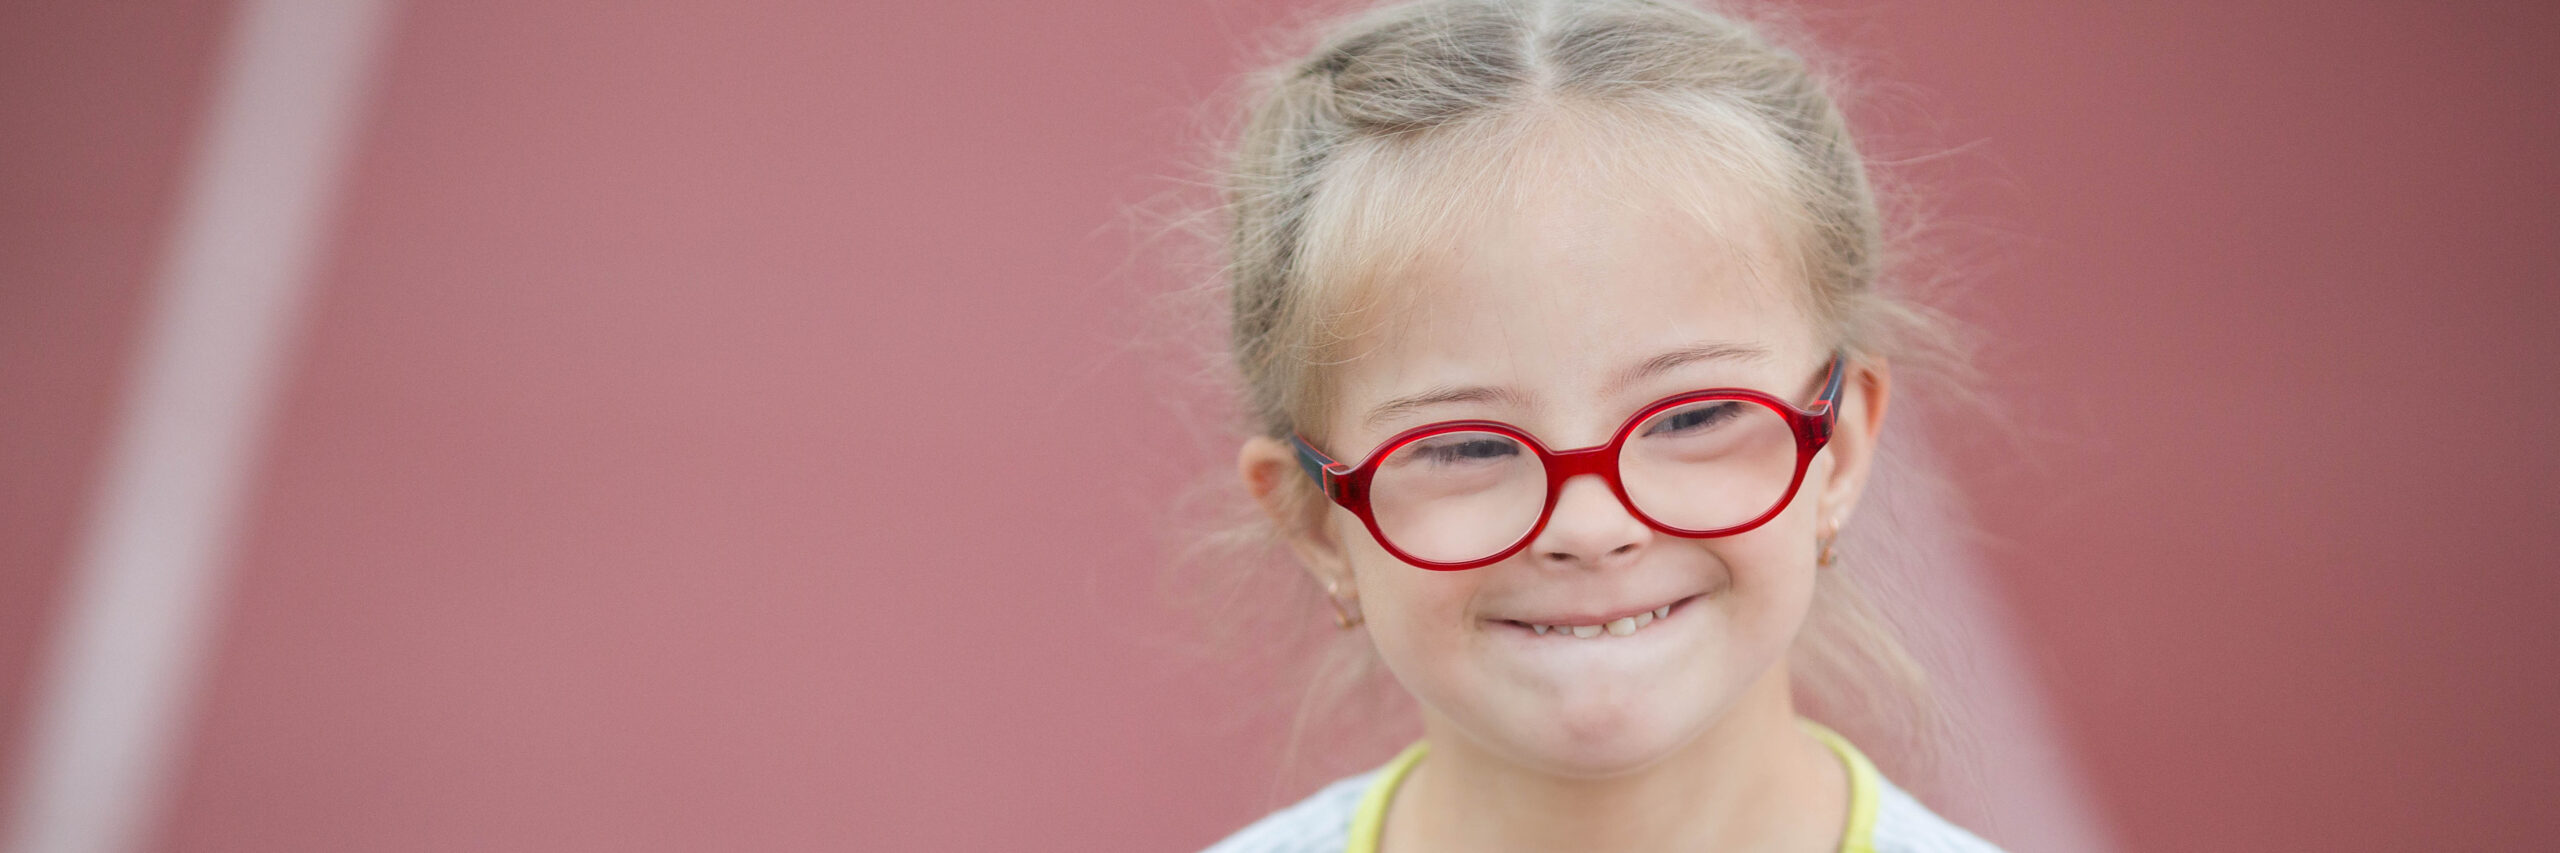 A little girl with red glasses